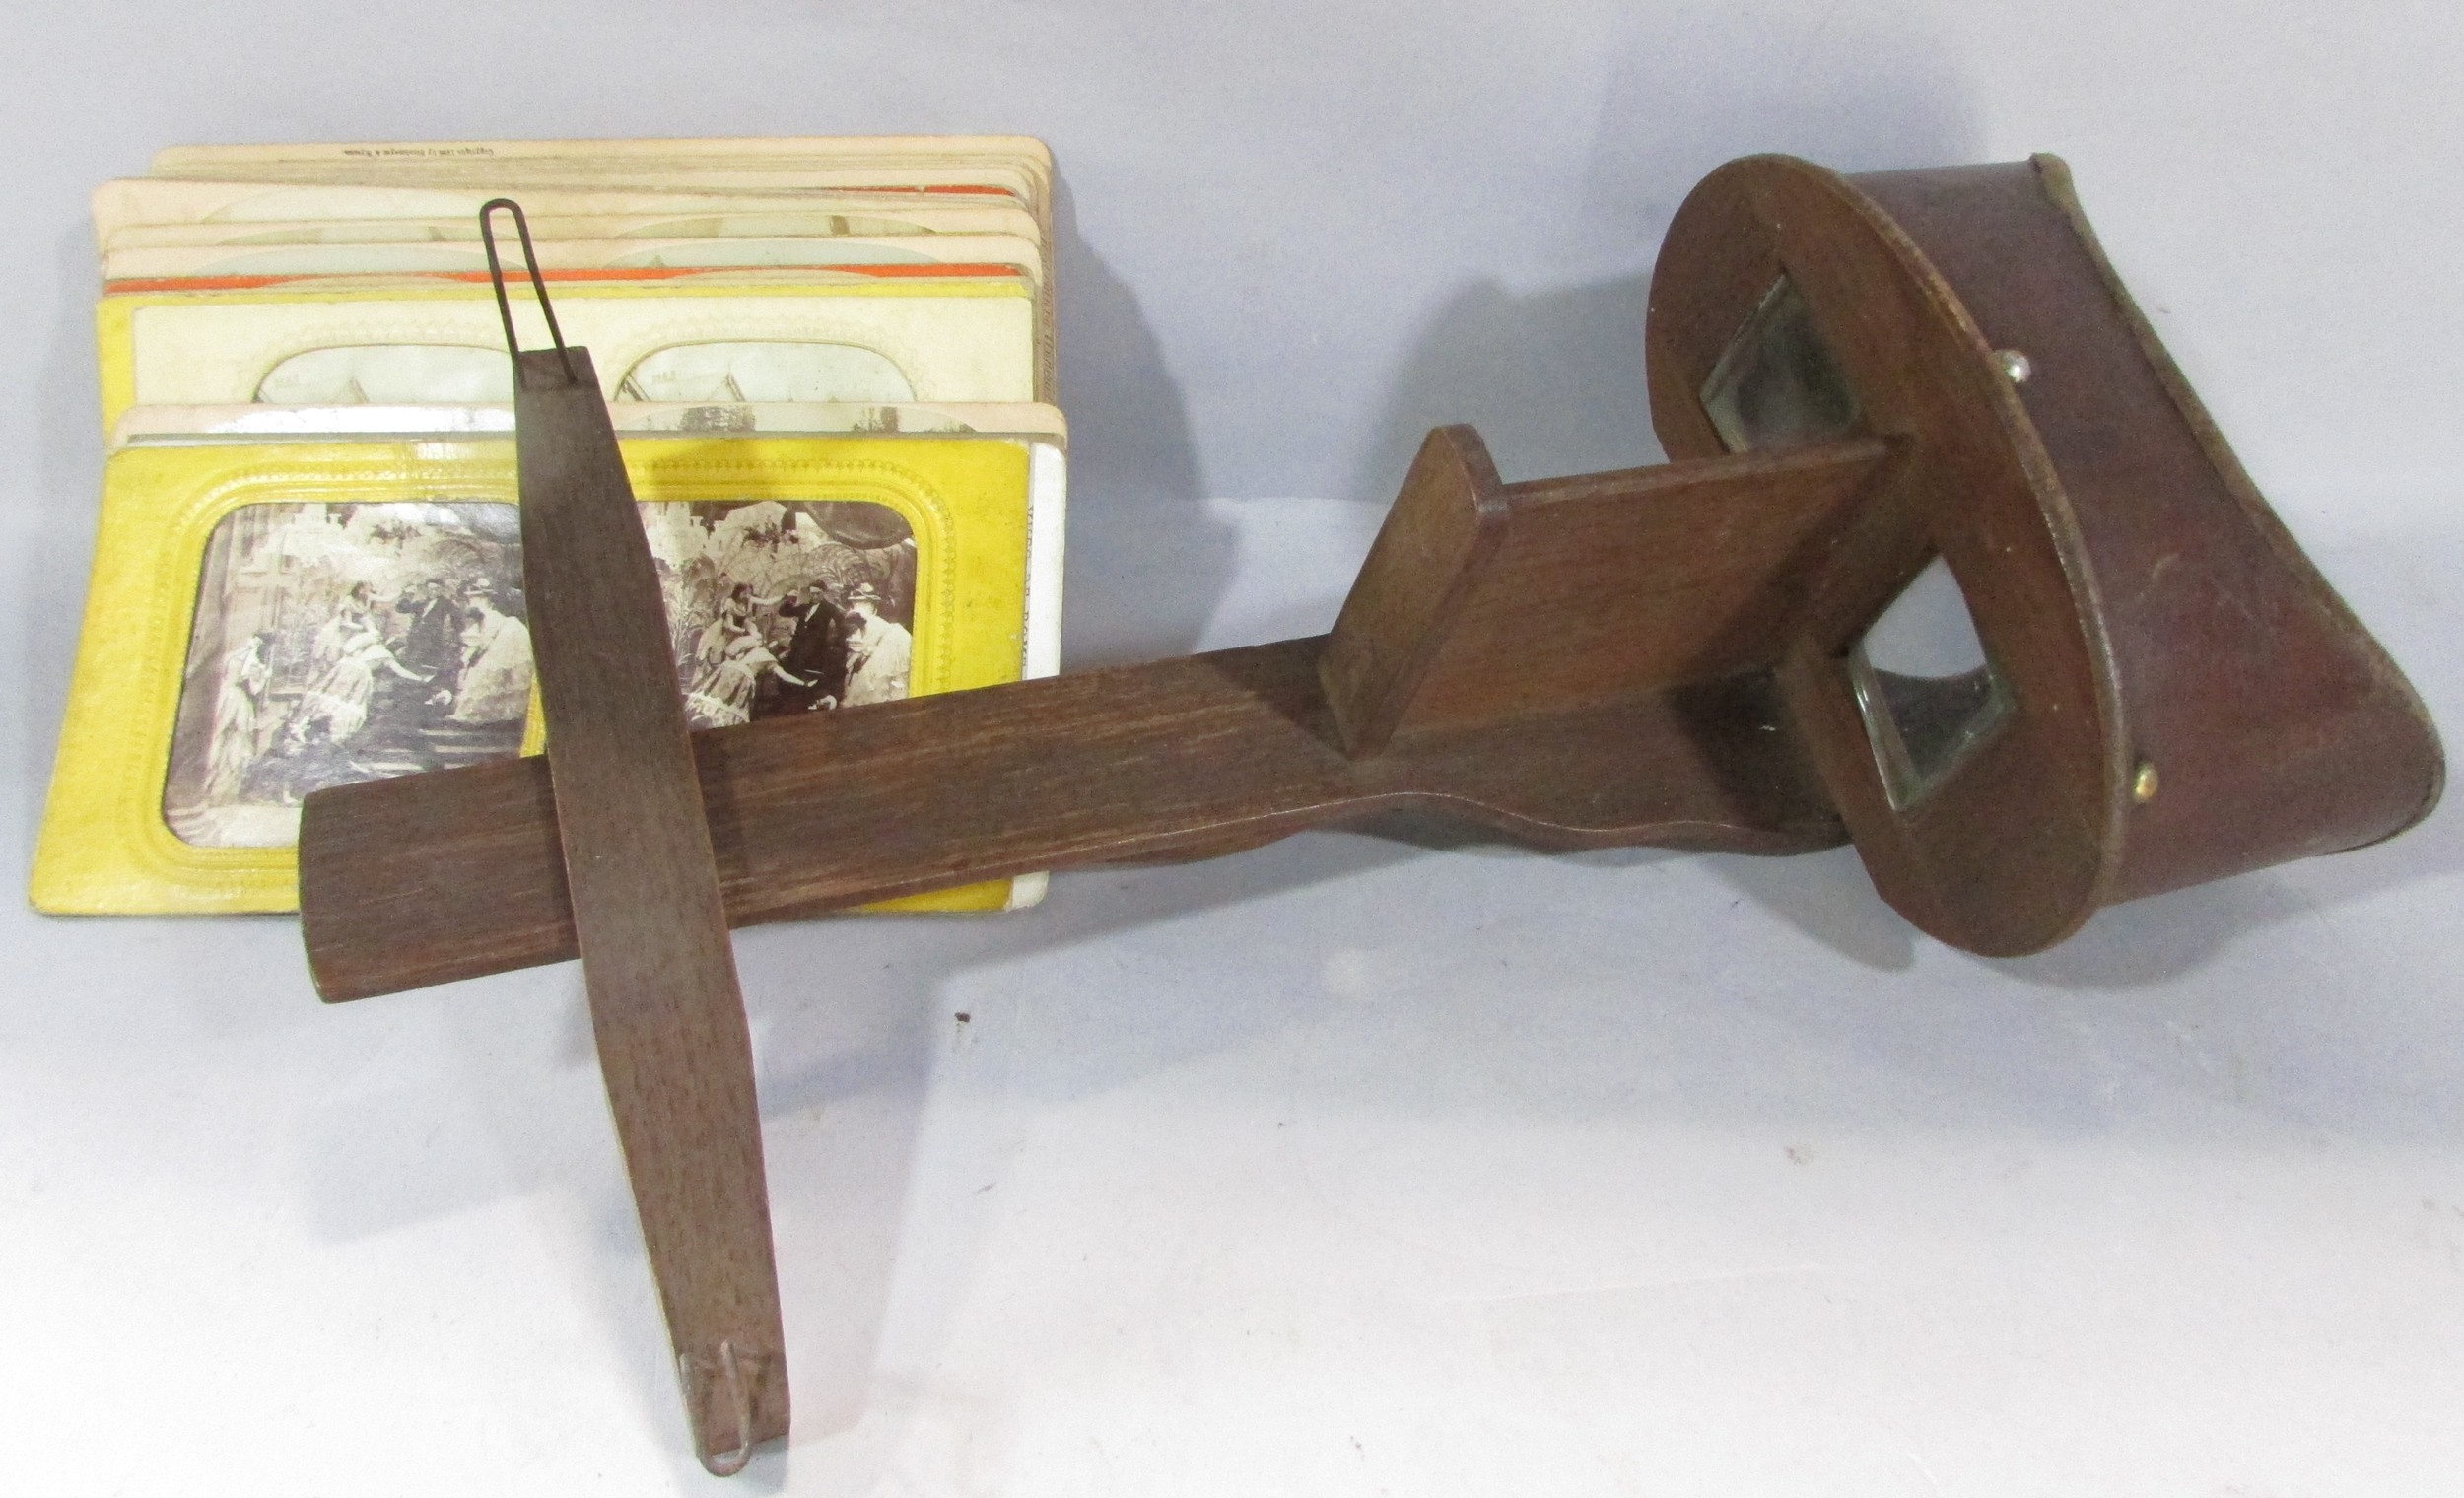 A Victorian Stereoscopic viewer, with a selection of topographical cards, rural landscapes, - Image 2 of 7